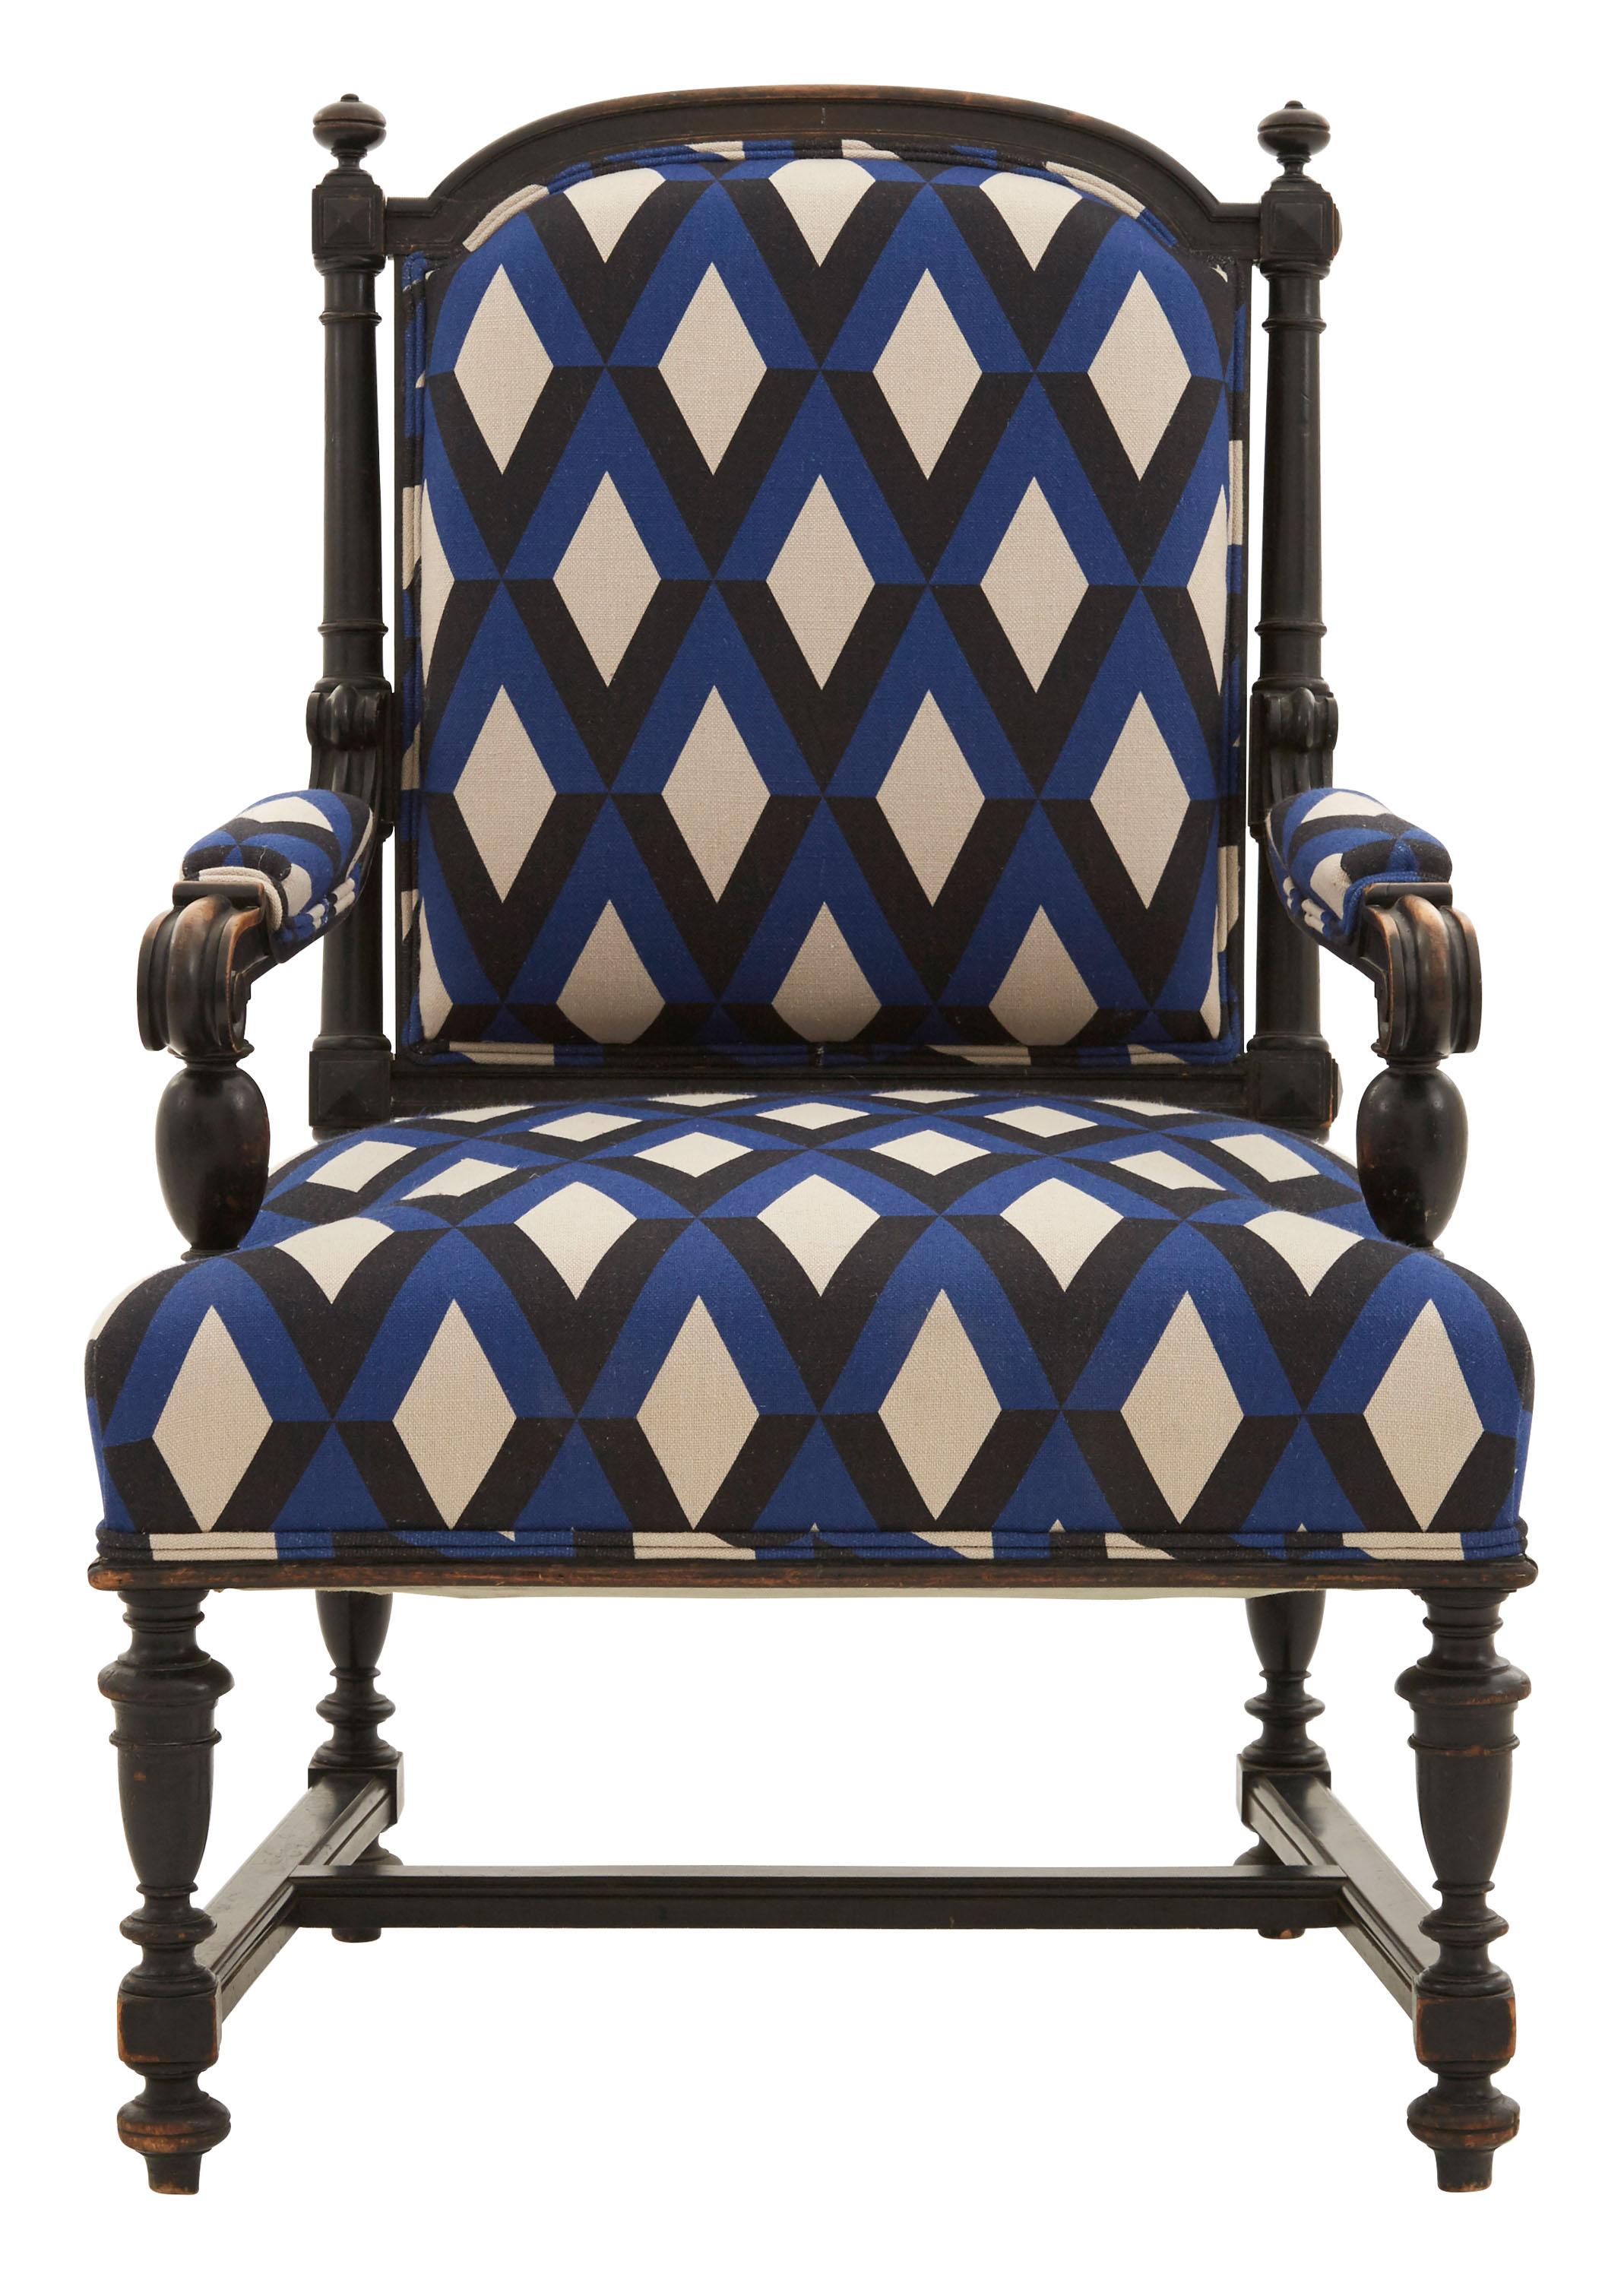 • Reupholstered in Gaston y Daniela Prati Azul linen
• Patinaed wood frame
• Early 20th century
• France

Dimensions
• 27.25